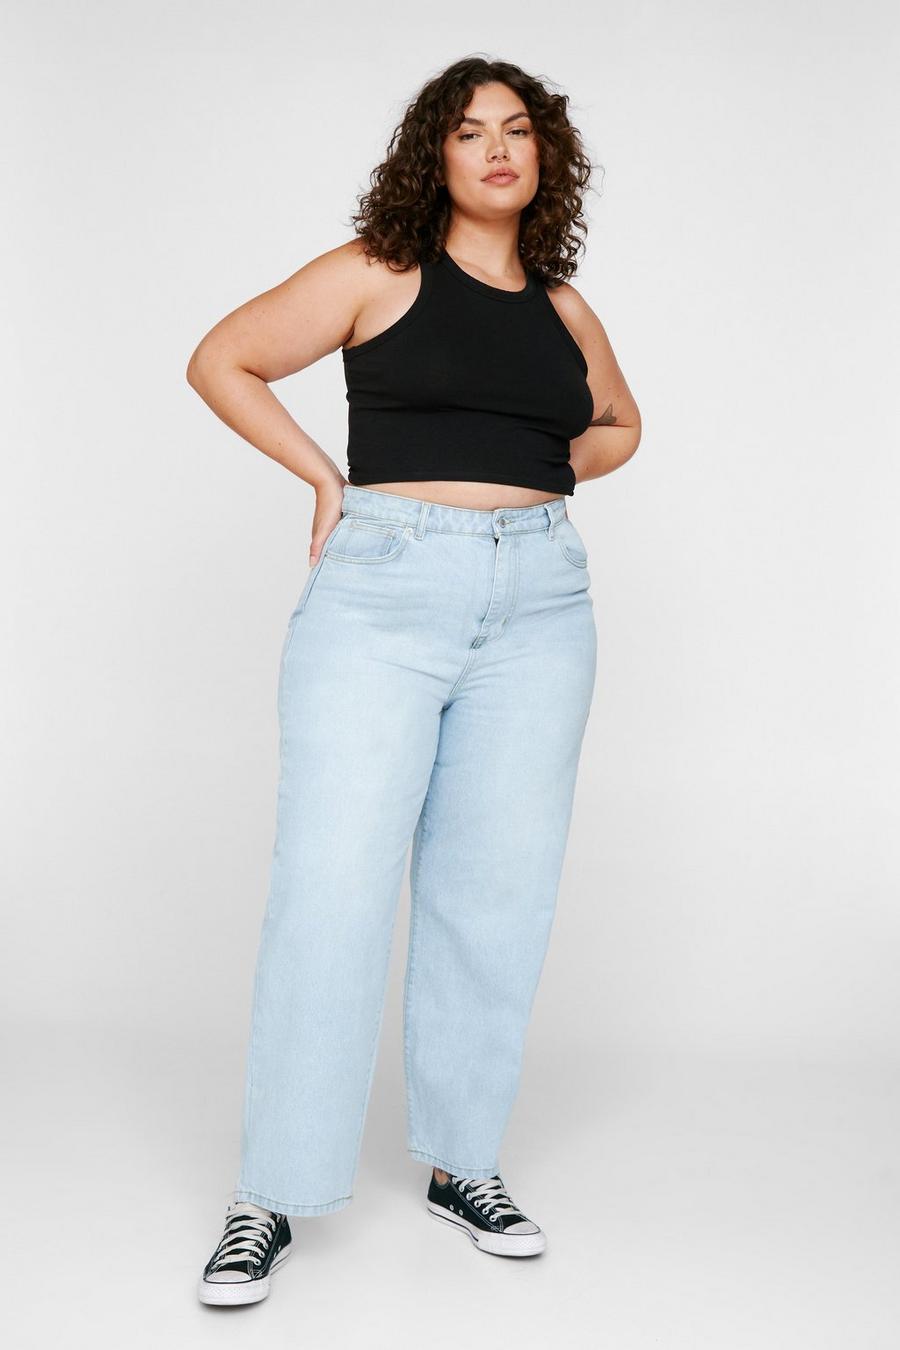 Plus Size Jeans | Curve Mom & Ripped Jeans | Nasty Gal